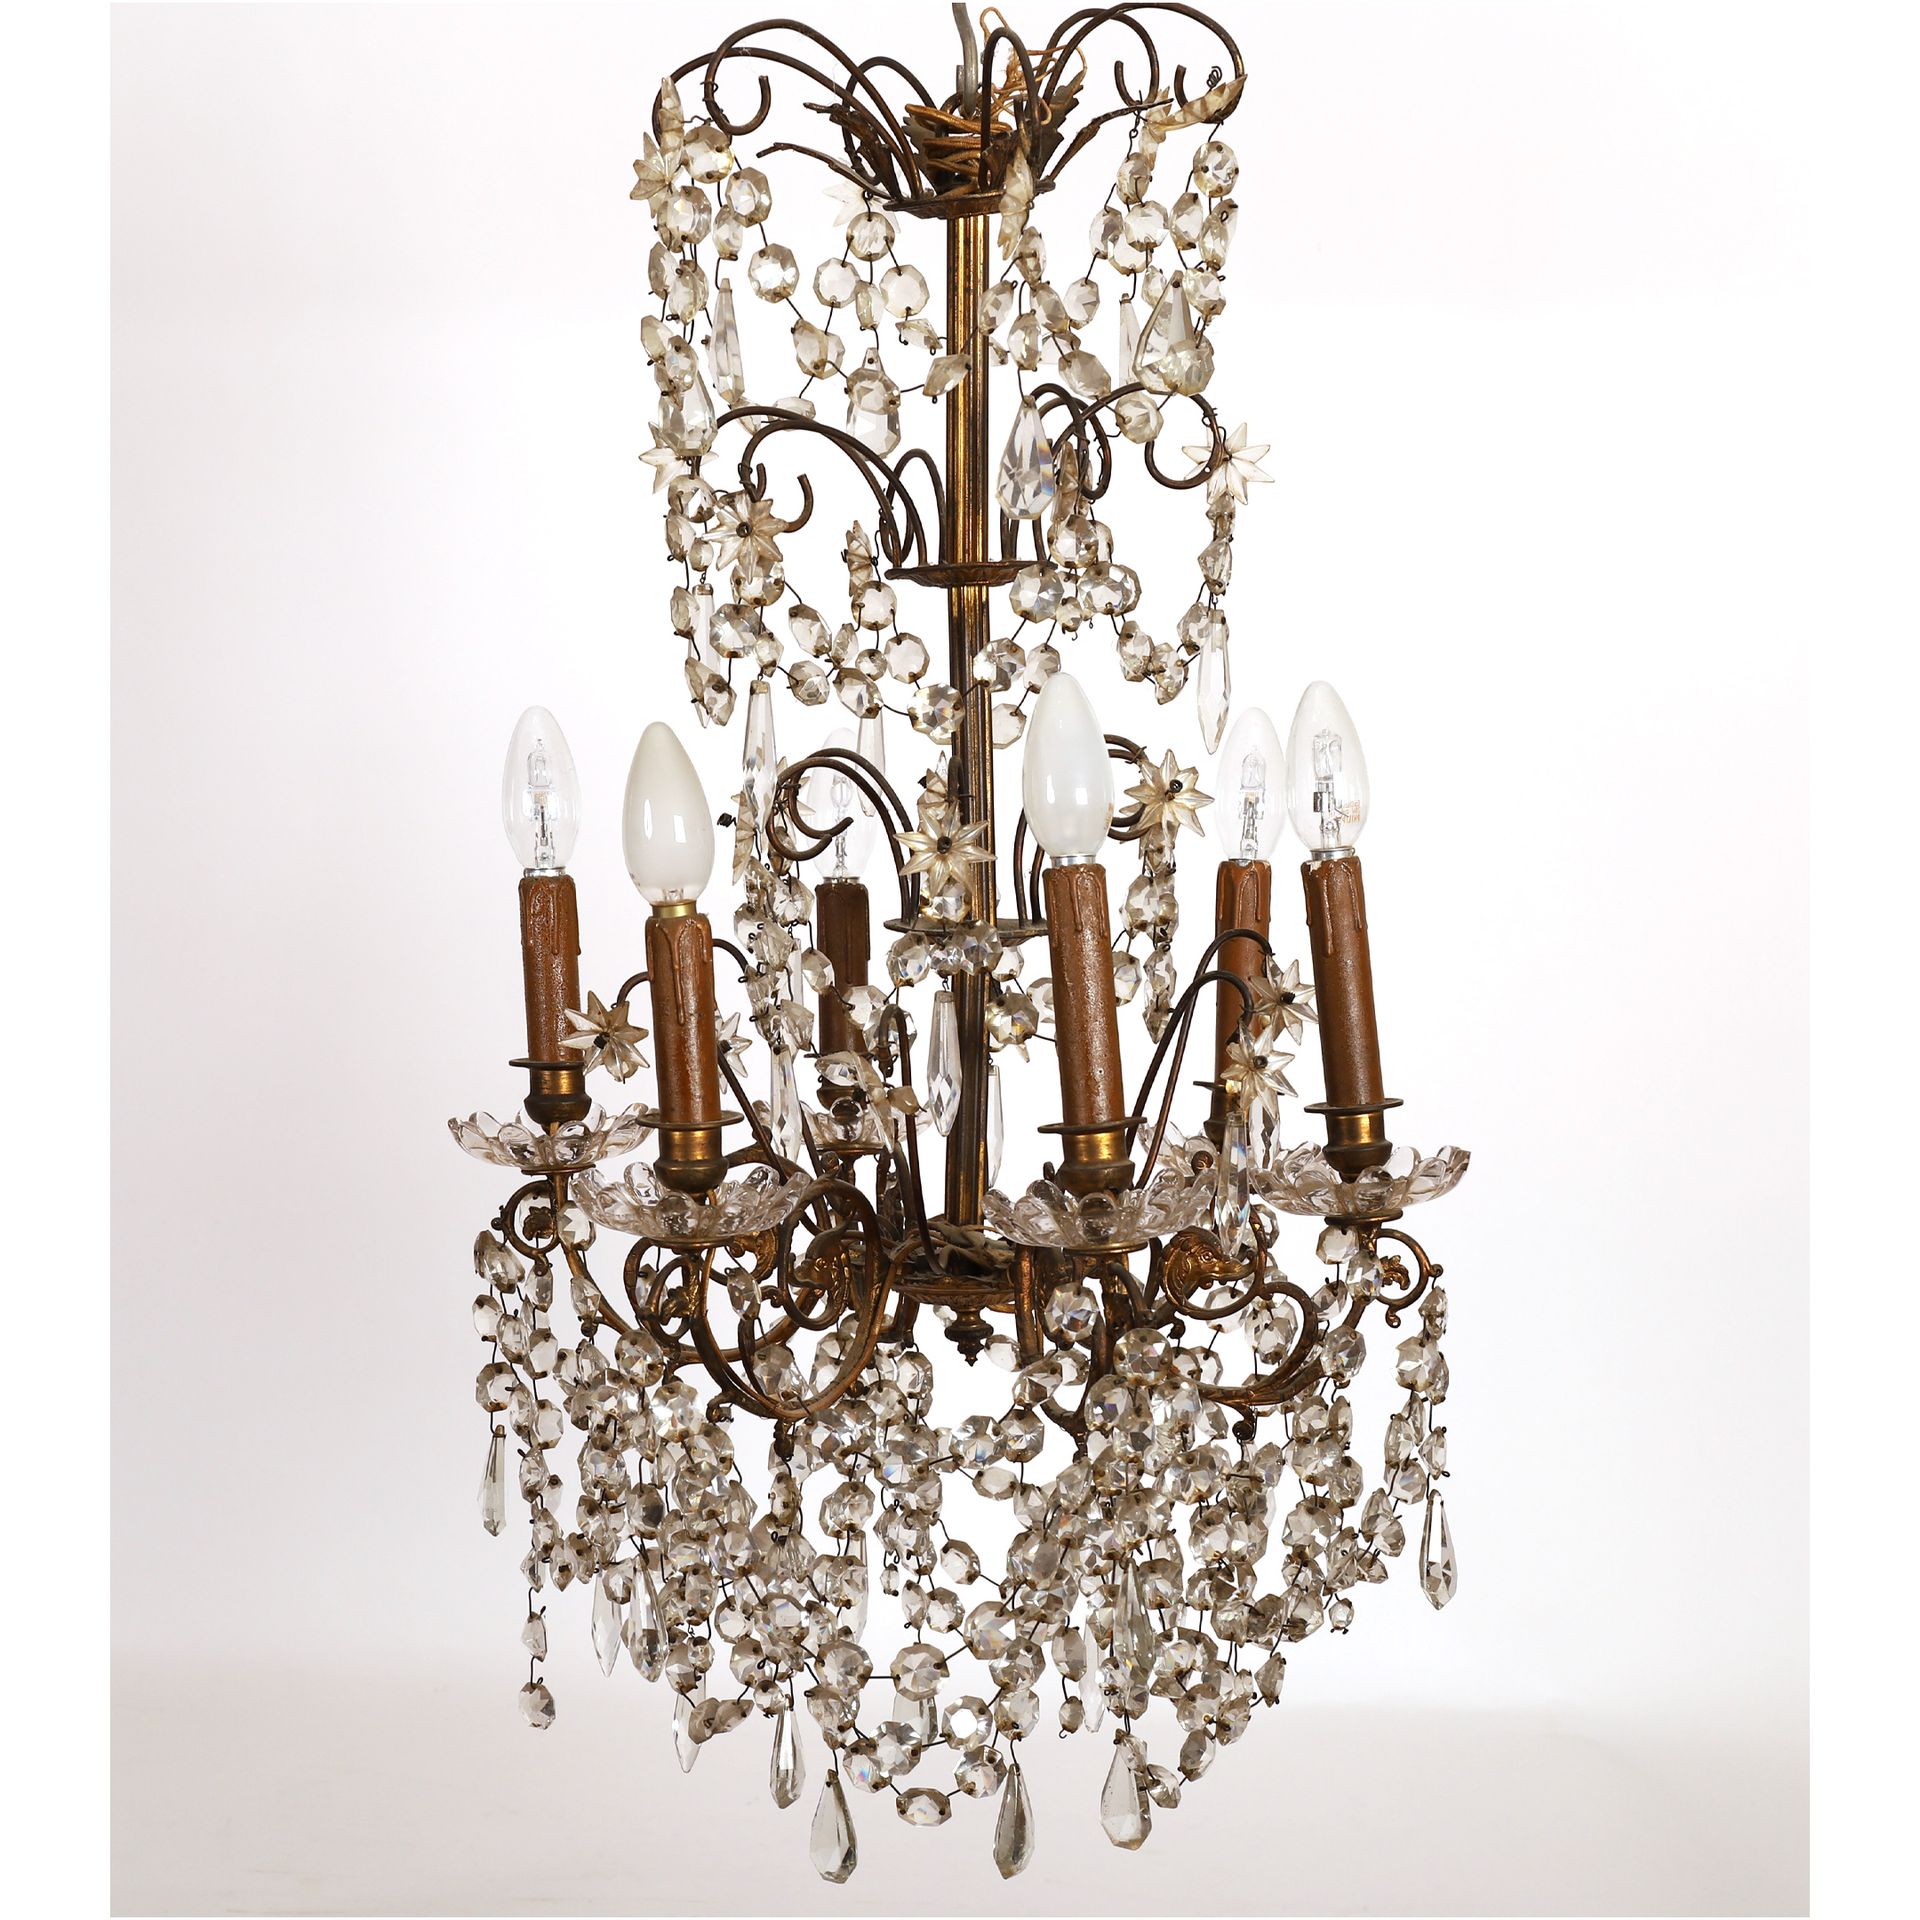 Null SMALL CHANDELIER WITH 6 ARMS OF LIGHTS IN BRASS

4 levels of garlands and f&hellip;